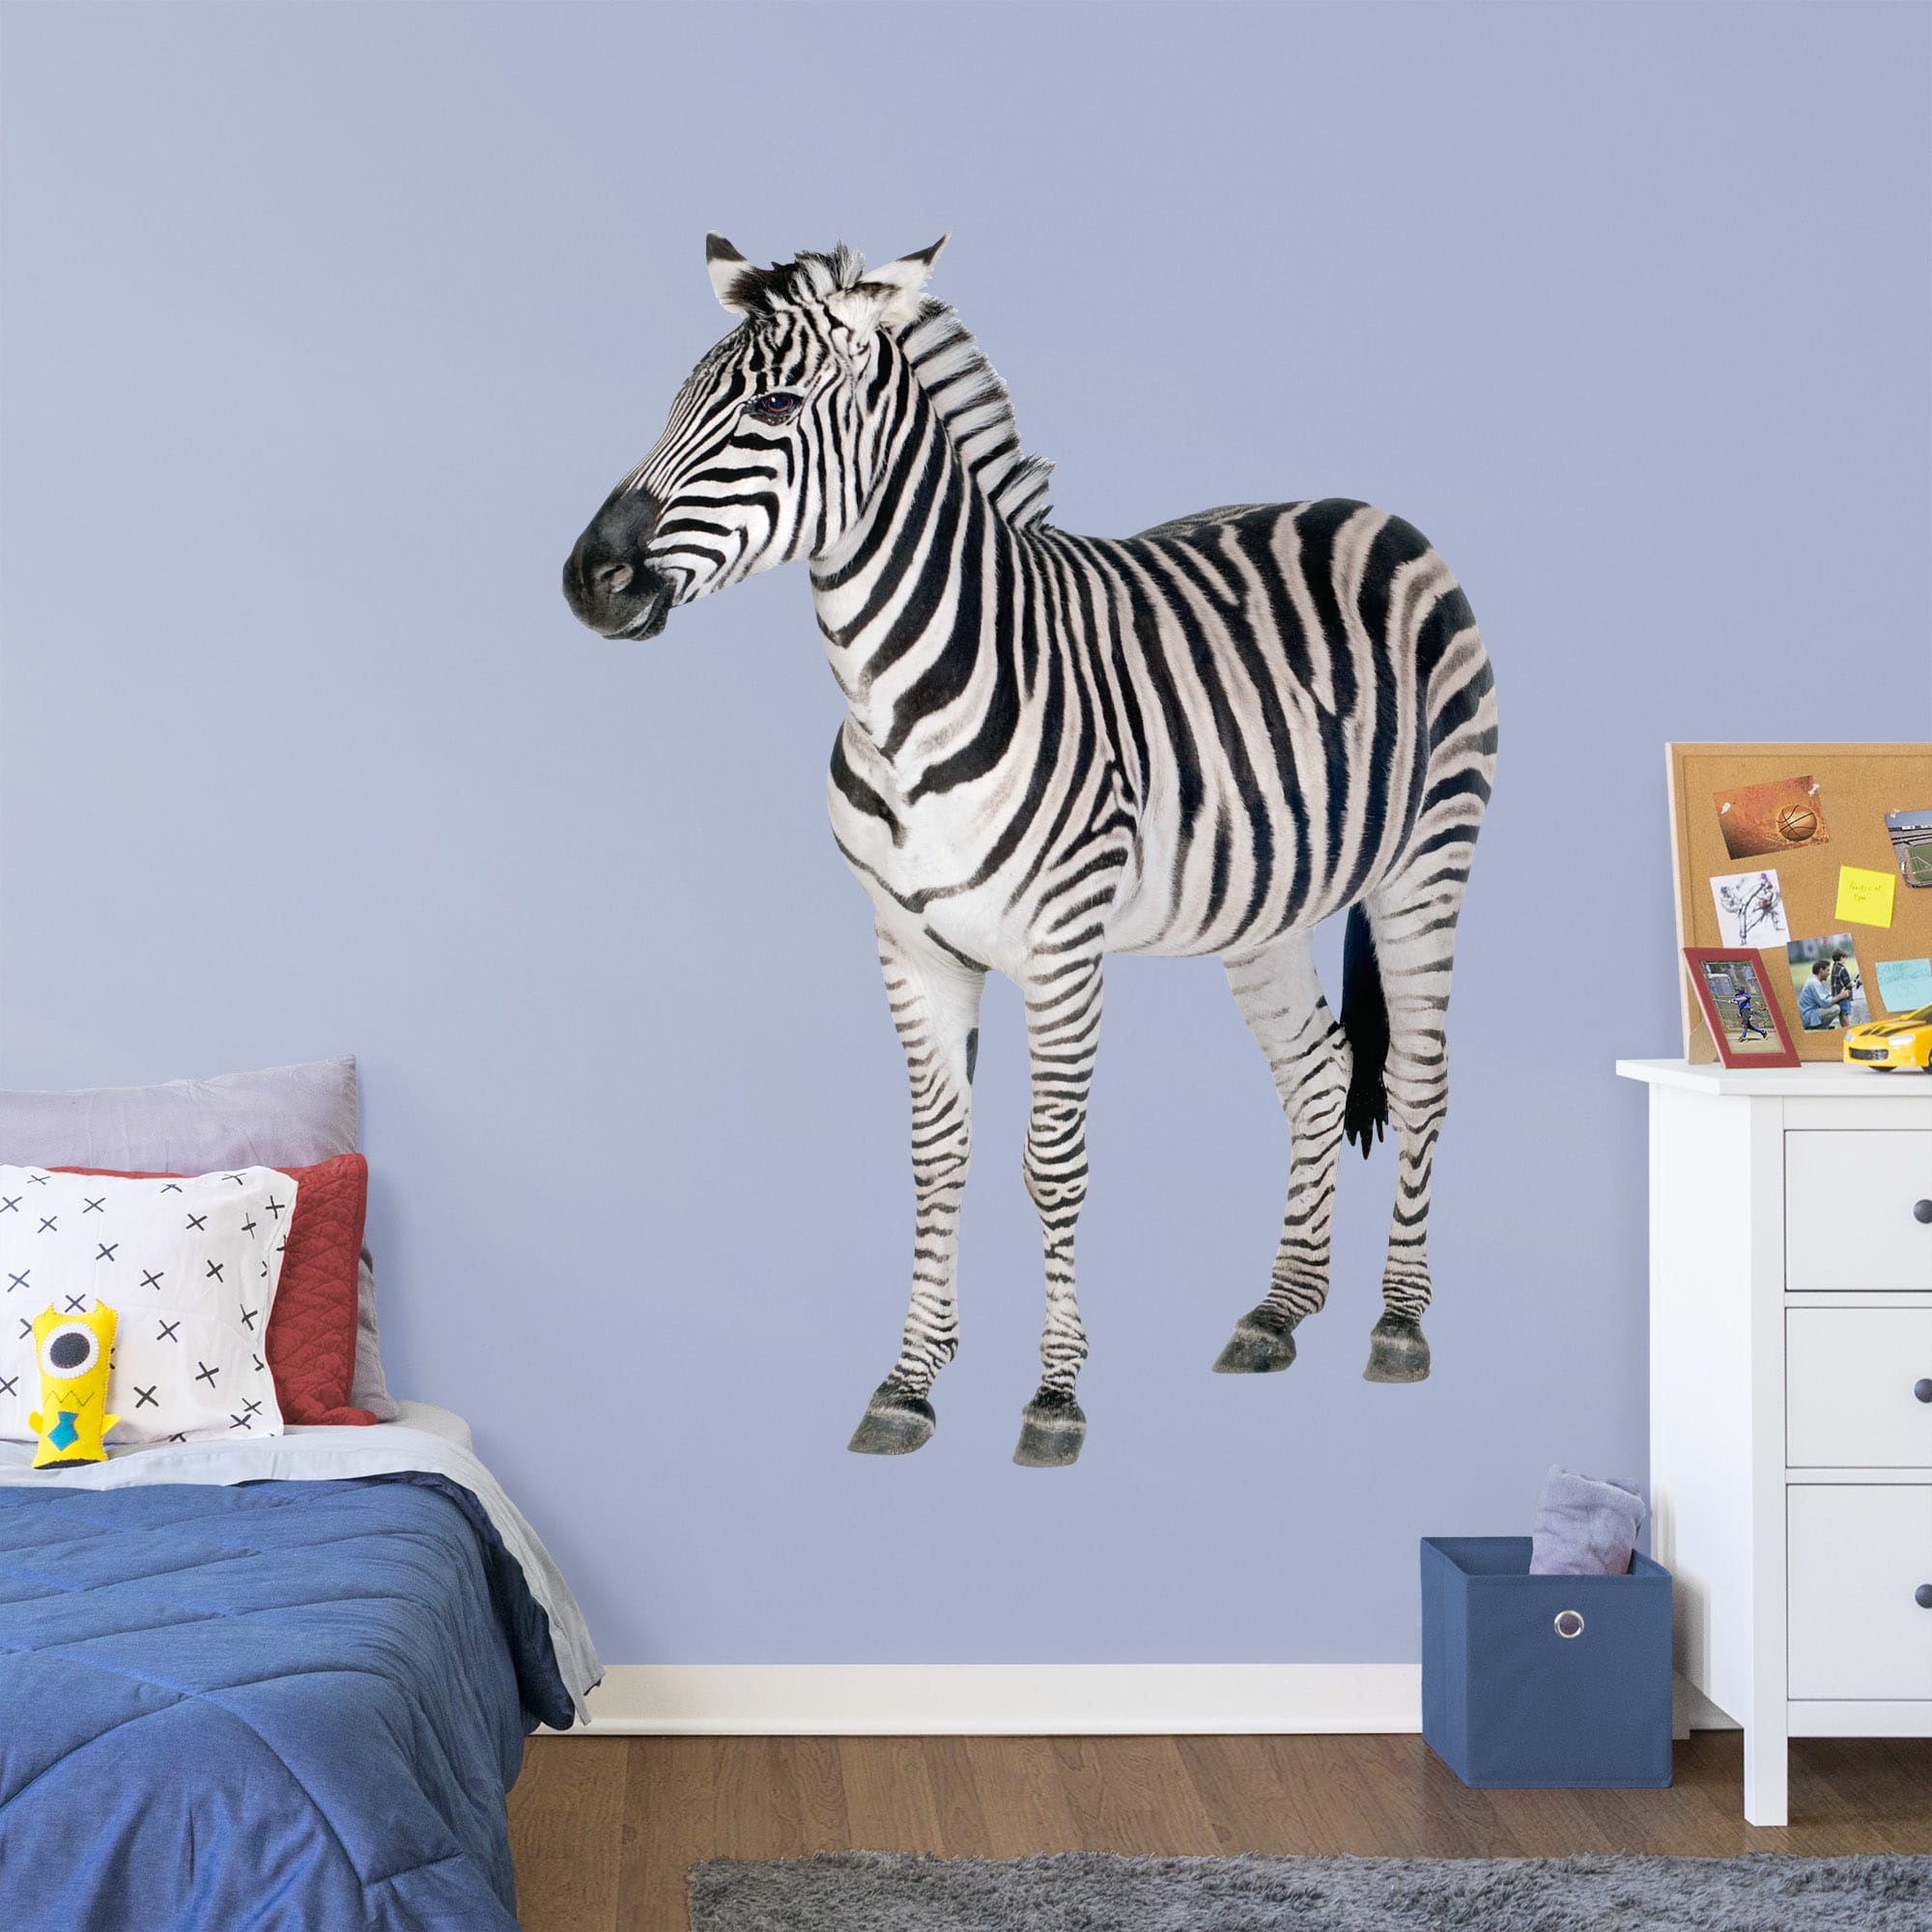 Zebra - Removable Vinyl Decal Life-Size Animal + 2 Decals (56"W x 73"H) by Fathead